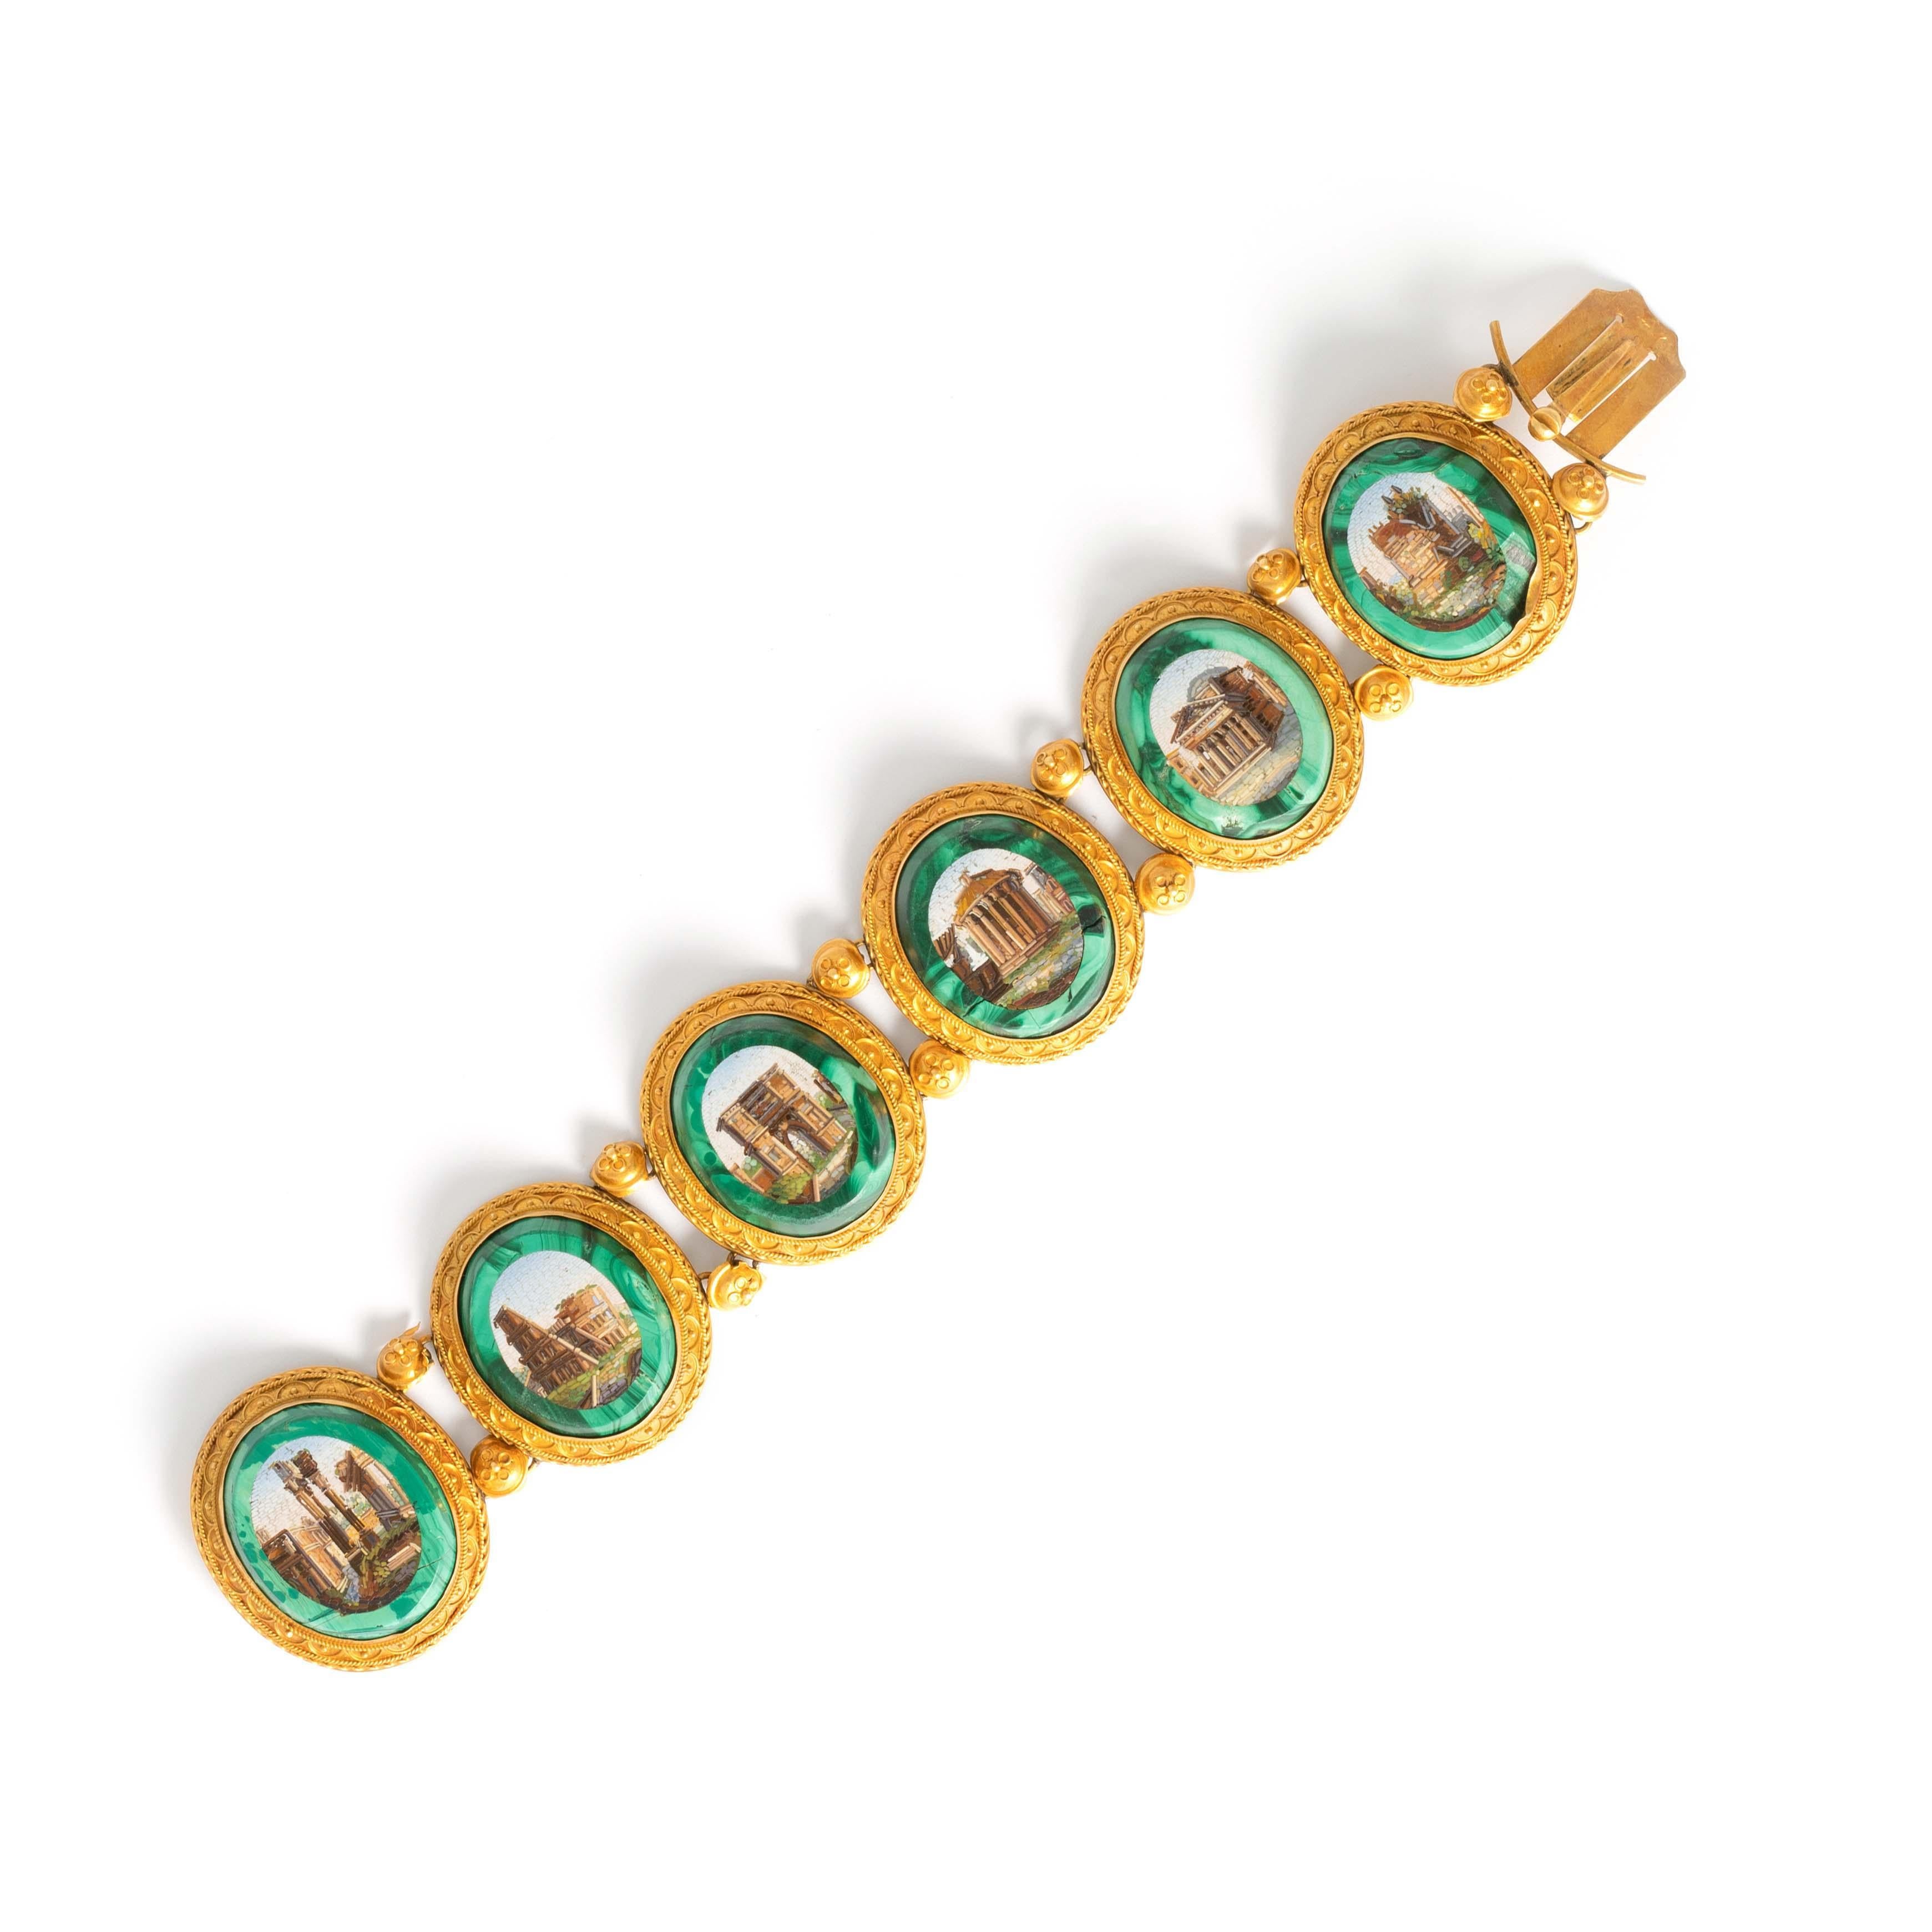 18K yellow gold bracelet holding six malachite and micromosaic. Italian work.
Accidents and missing pieces. 
Length: 17.50 centimeters.
Total weight: 49.23 grams.